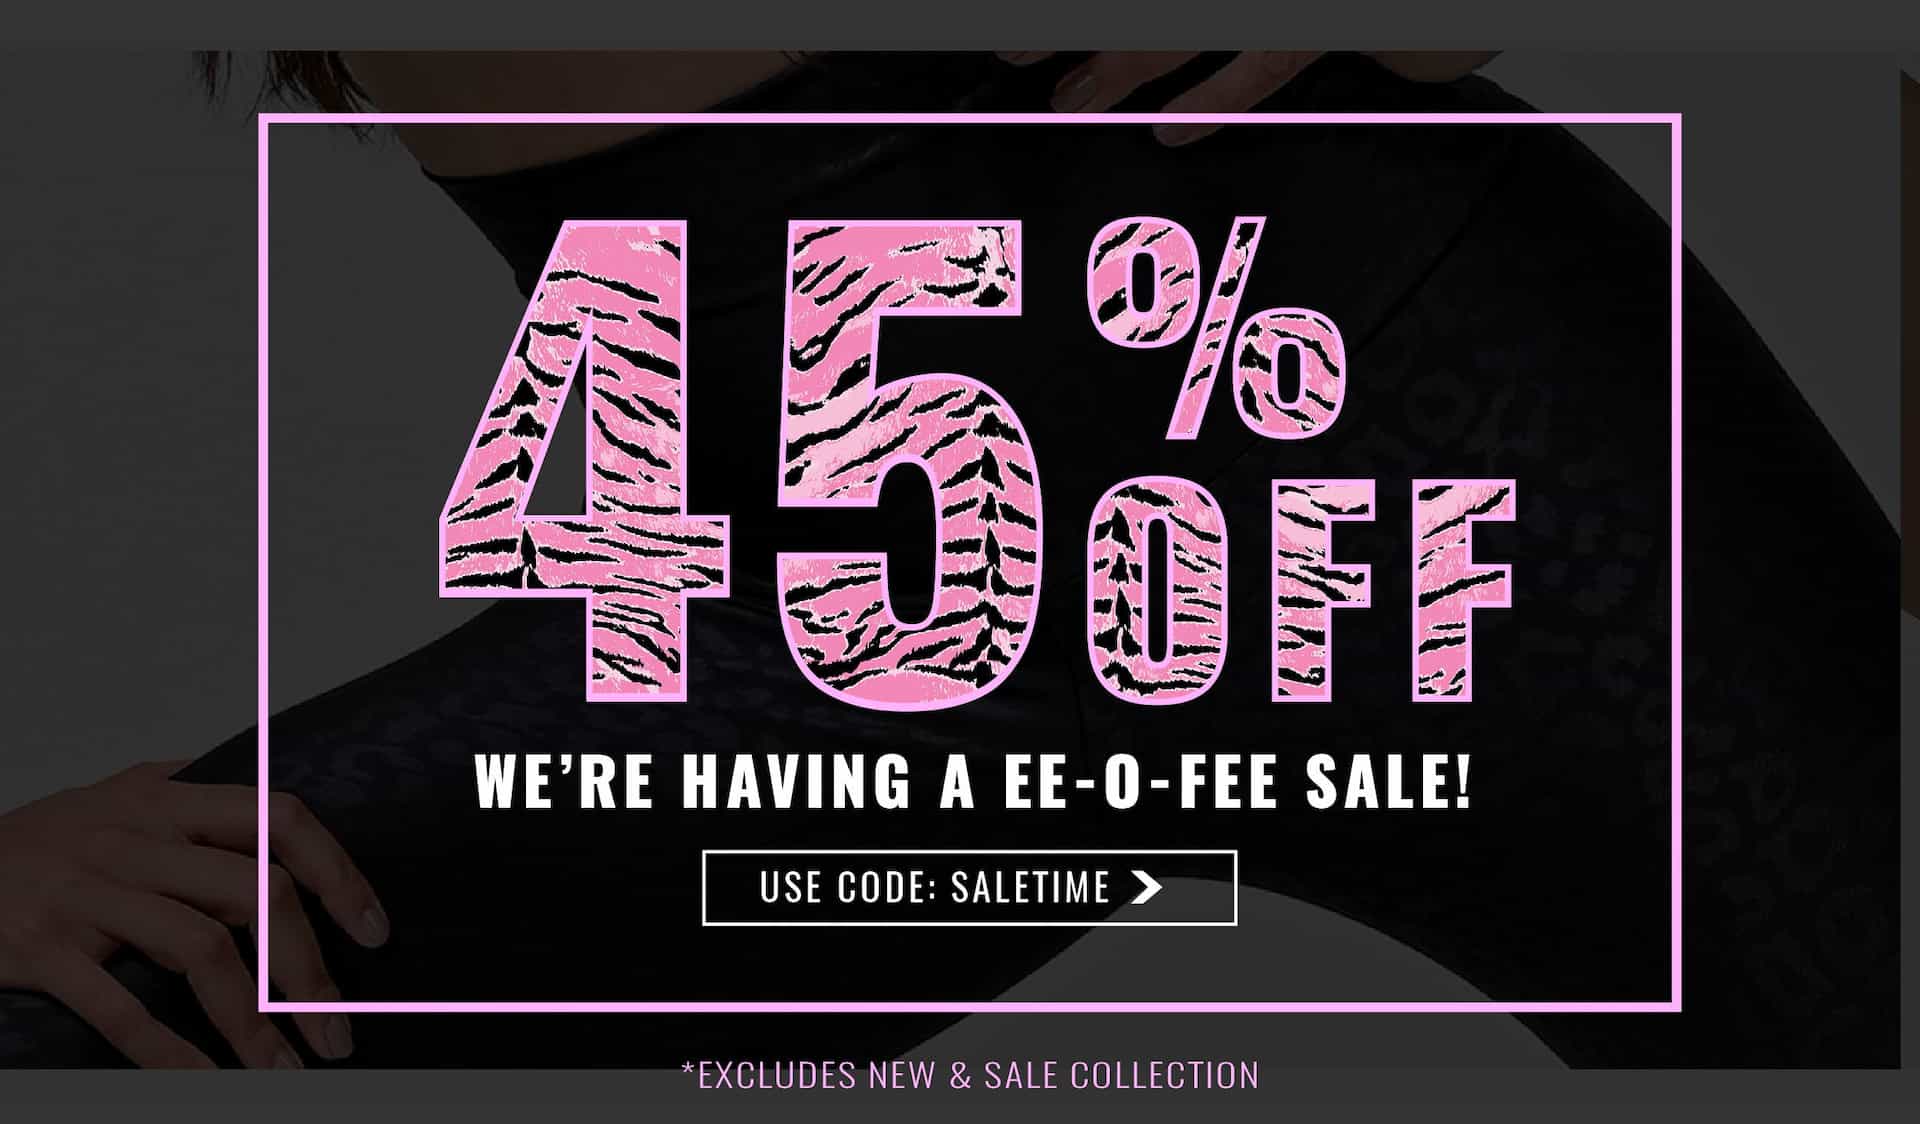 45% OFF on EOFY sale items